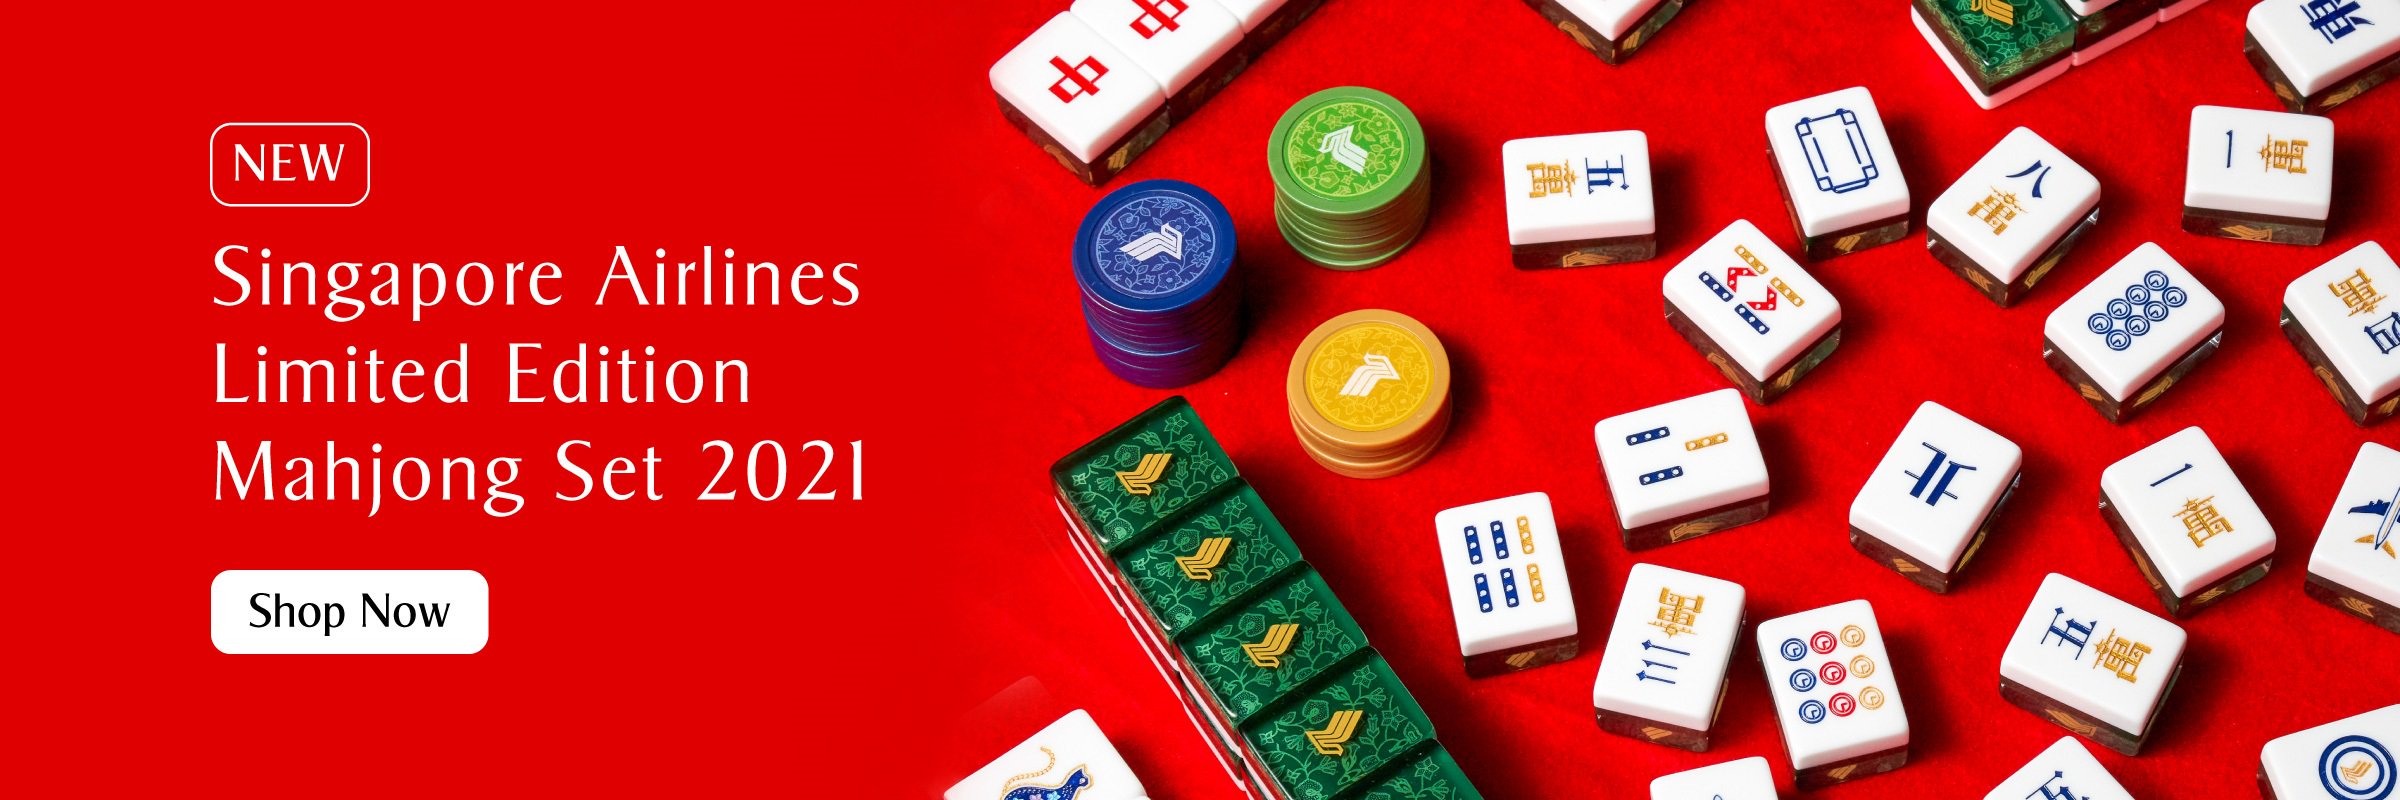 Singapore Airlines Limited Edition Mahjong Set 2021